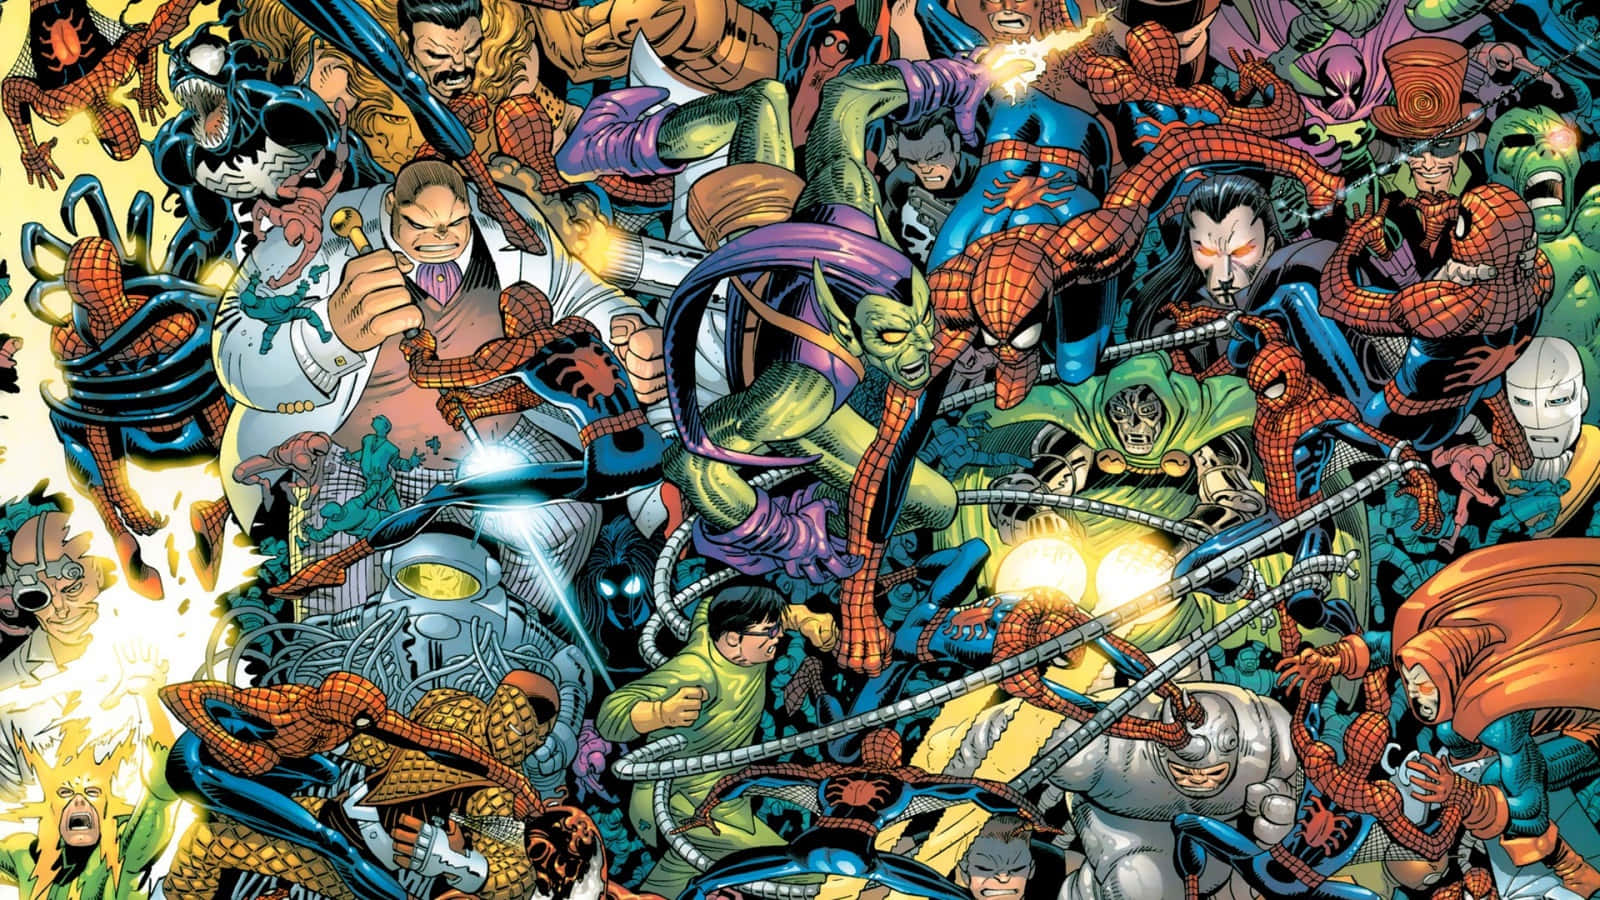 A Comic Book Cover With Many Characters